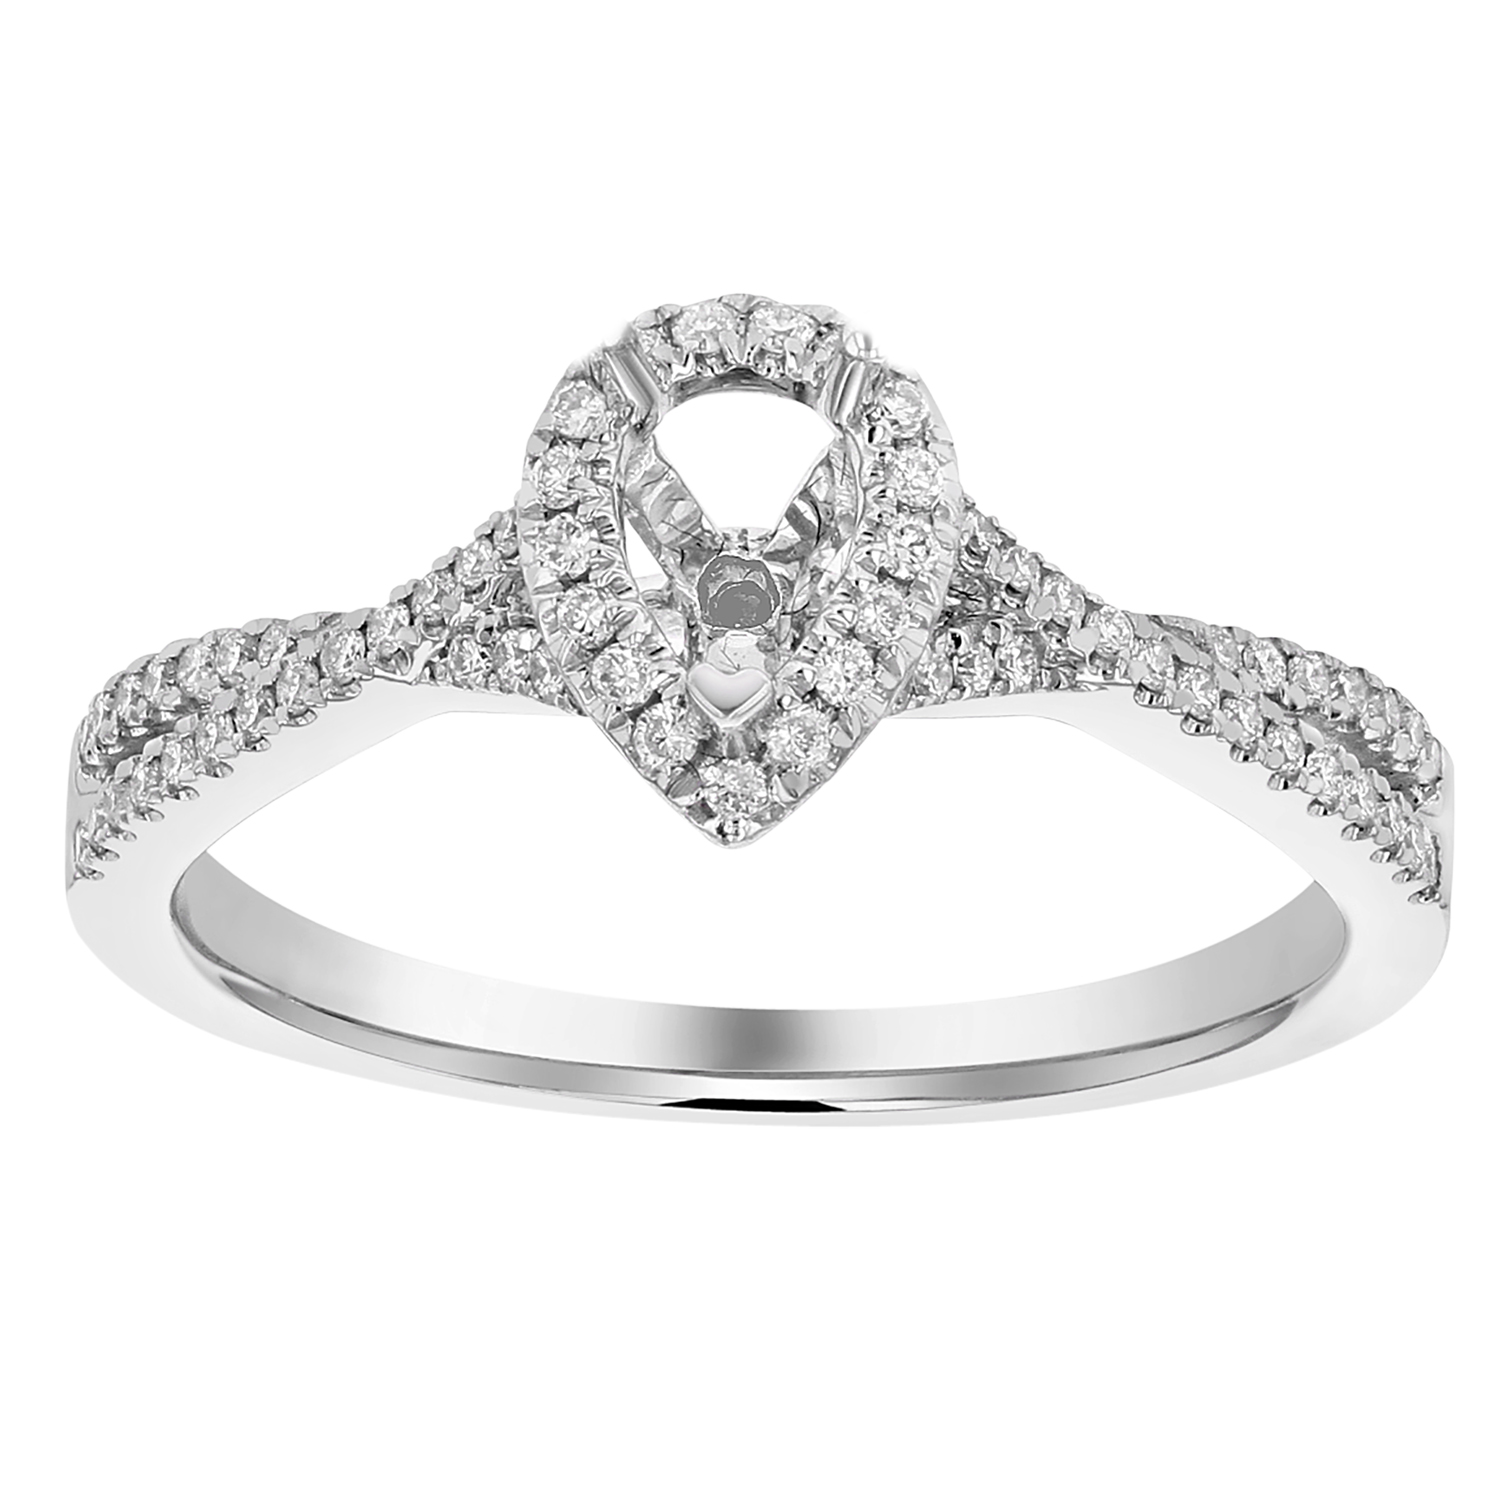 View 0.22ctw Diamond Pear Shaped Semi Mount in 18k White Gold